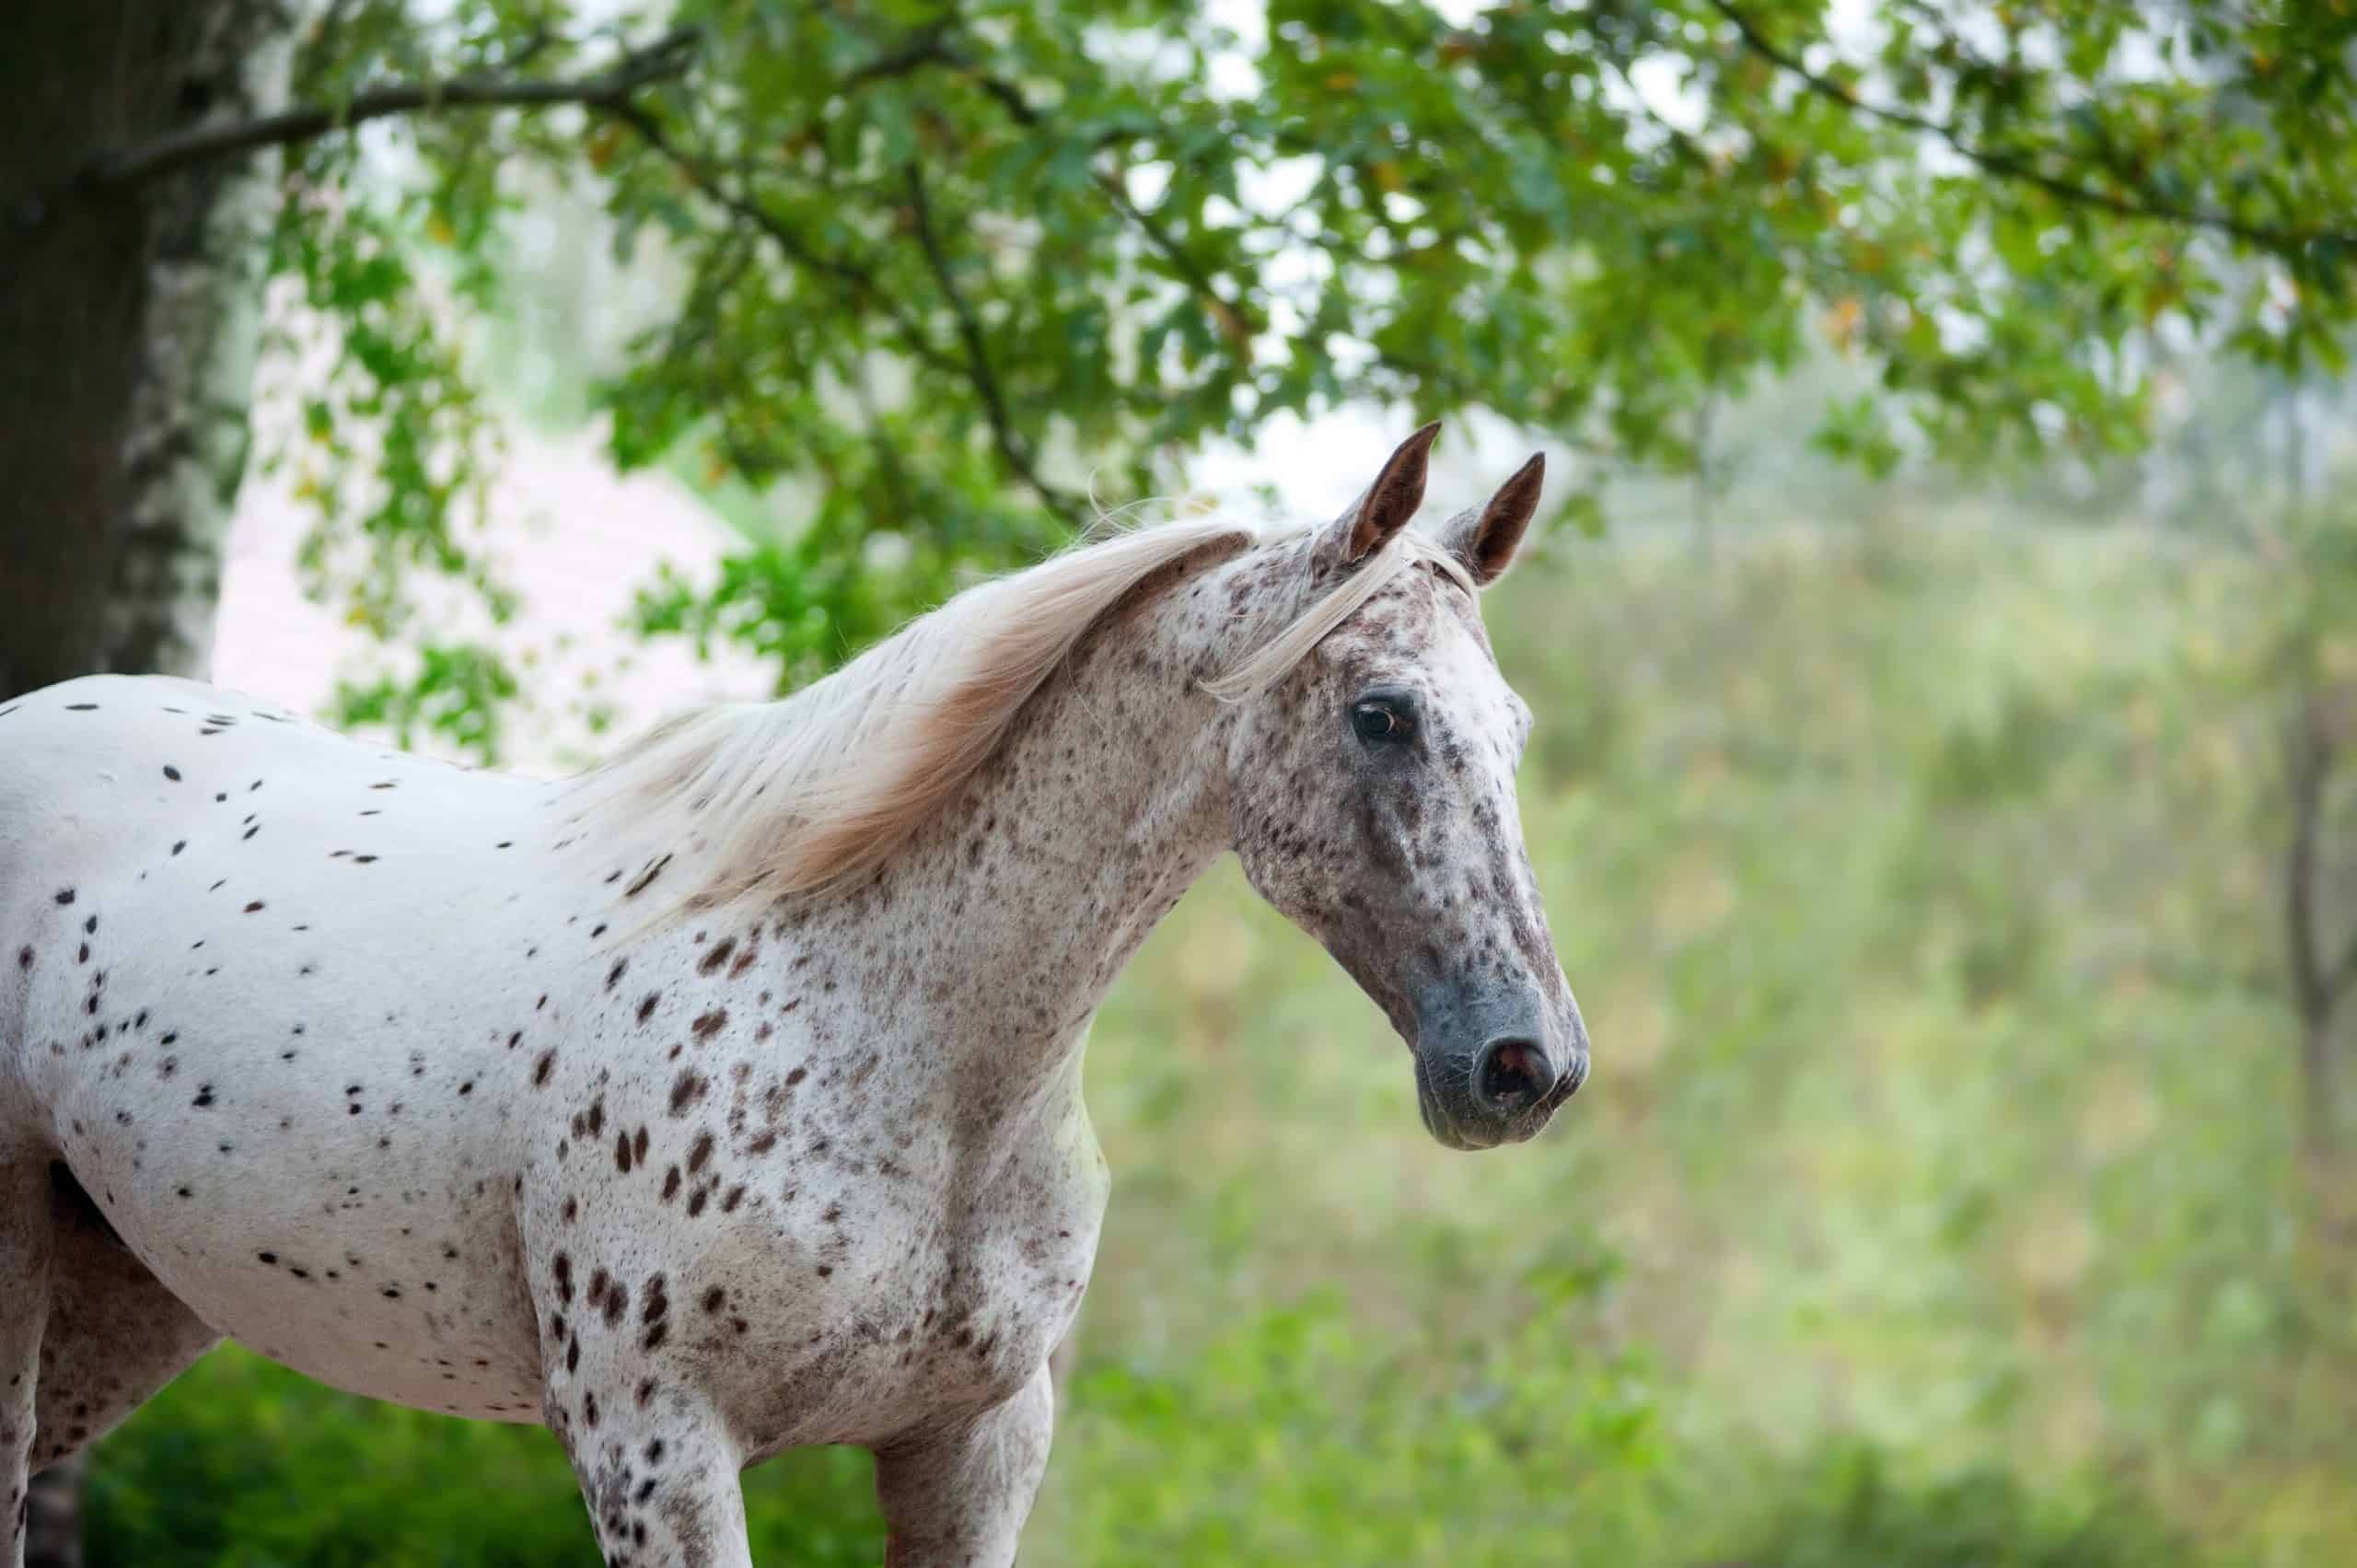 Portrait of knabstrupper breed horse - white with brown spots on coat